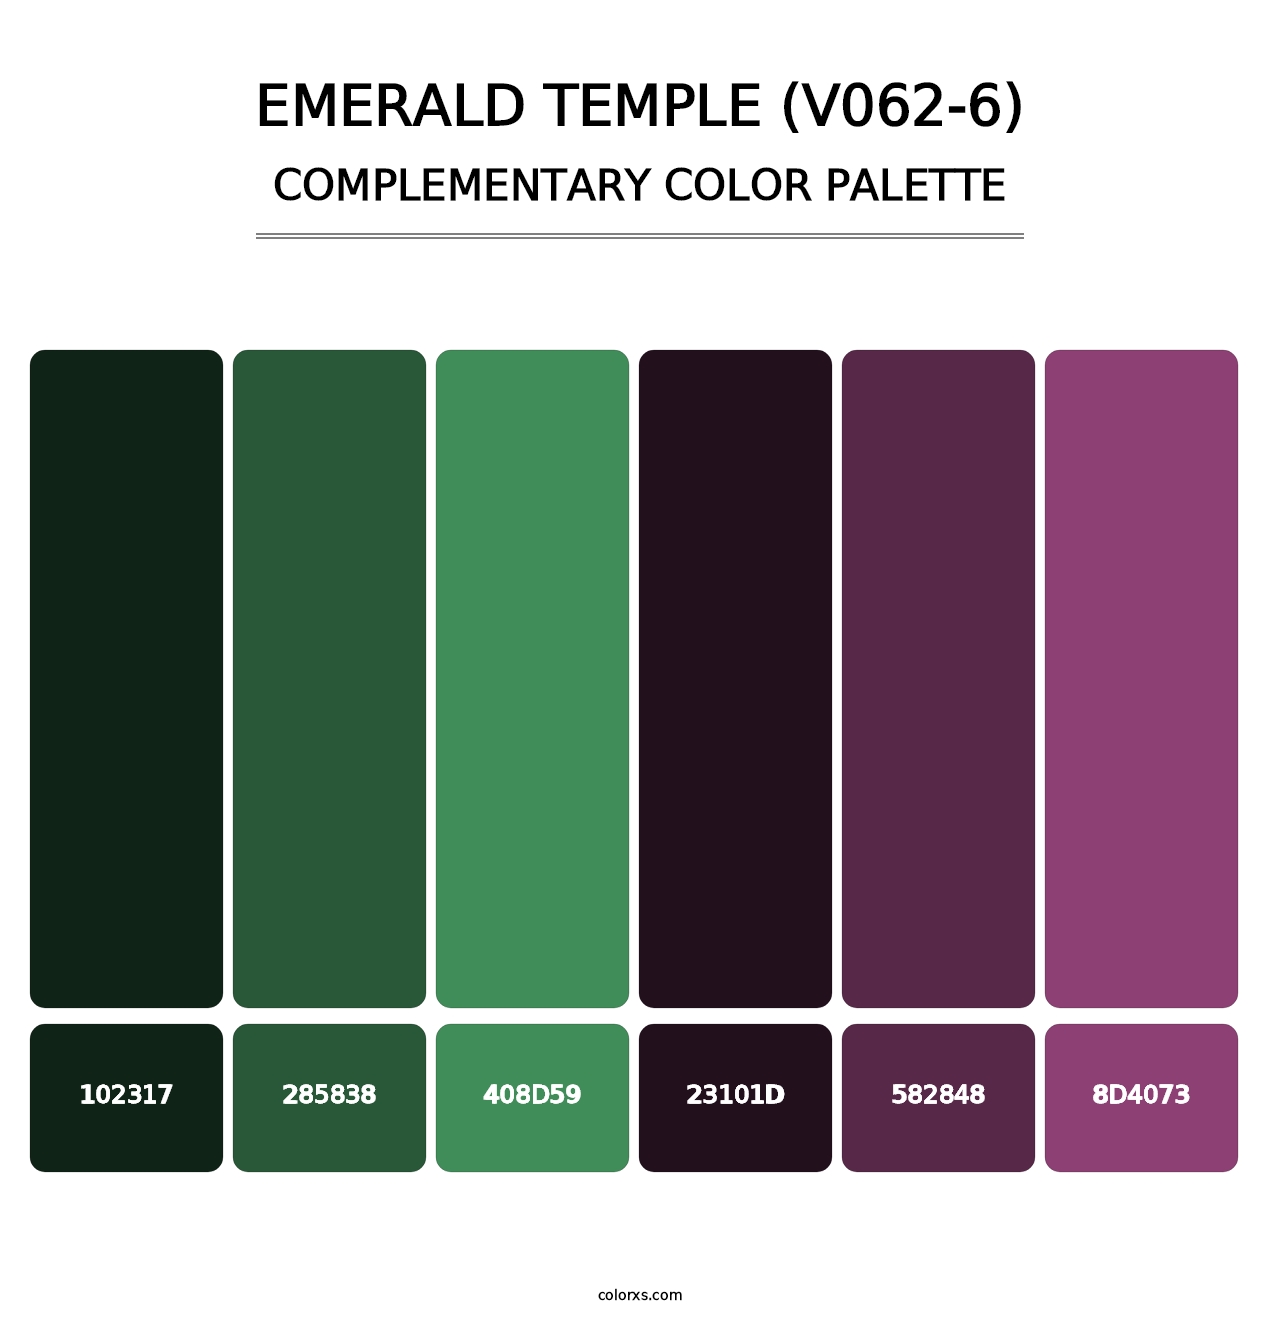 Emerald Temple (V062-6) - Complementary Color Palette